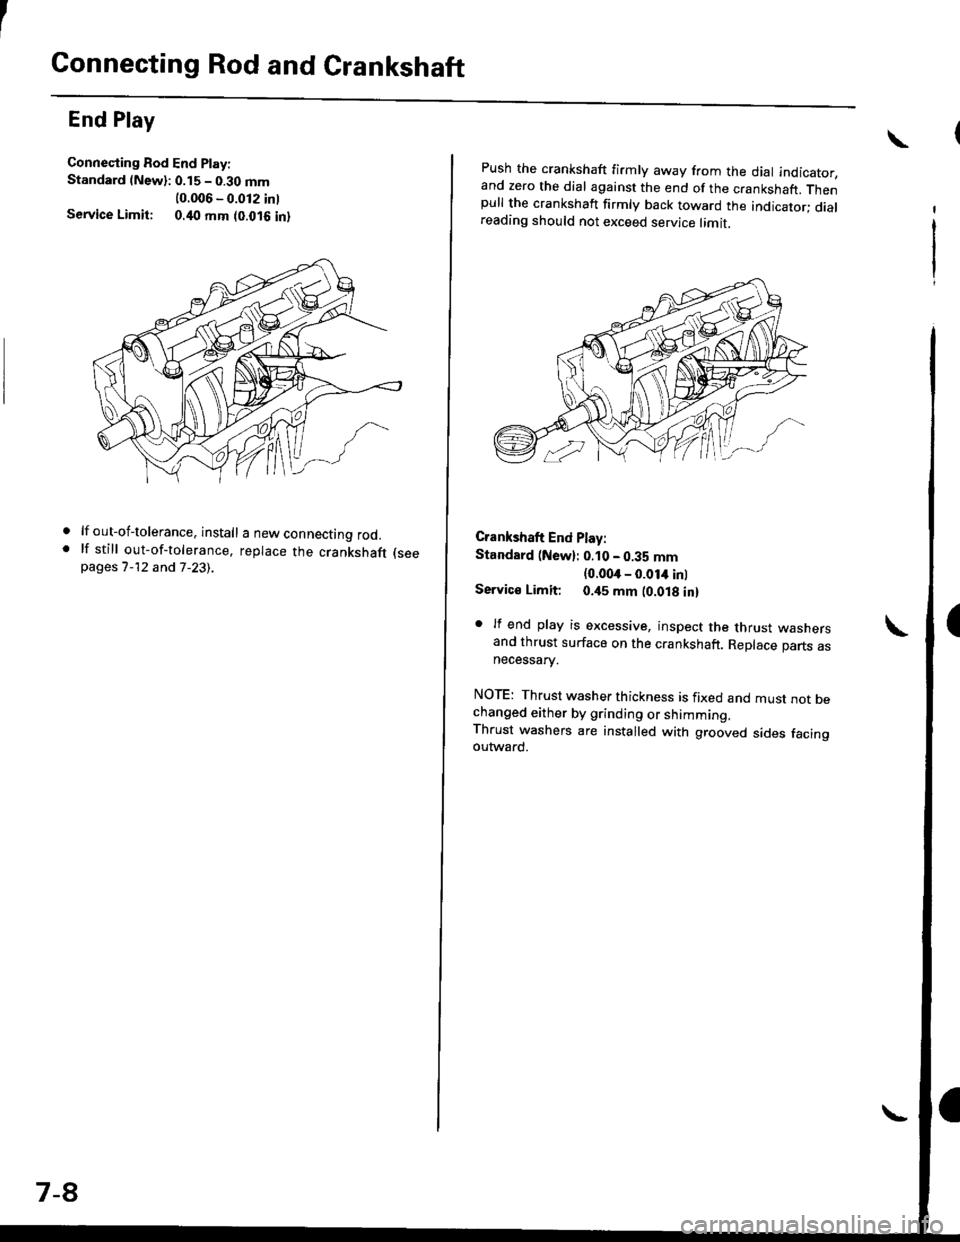 HONDA CIVIC 1998 6.G Workshop Manual Connecting Rod and Crankshaft
End Play
Connecling Bod End Play:
Standard (Newl: 0.15 - 0.30 mm
10.006 - 0.012 inlService Limit: 0.40 mm (0.016 inl
lf out-of-tolerance. install a new connecting rod.lf 